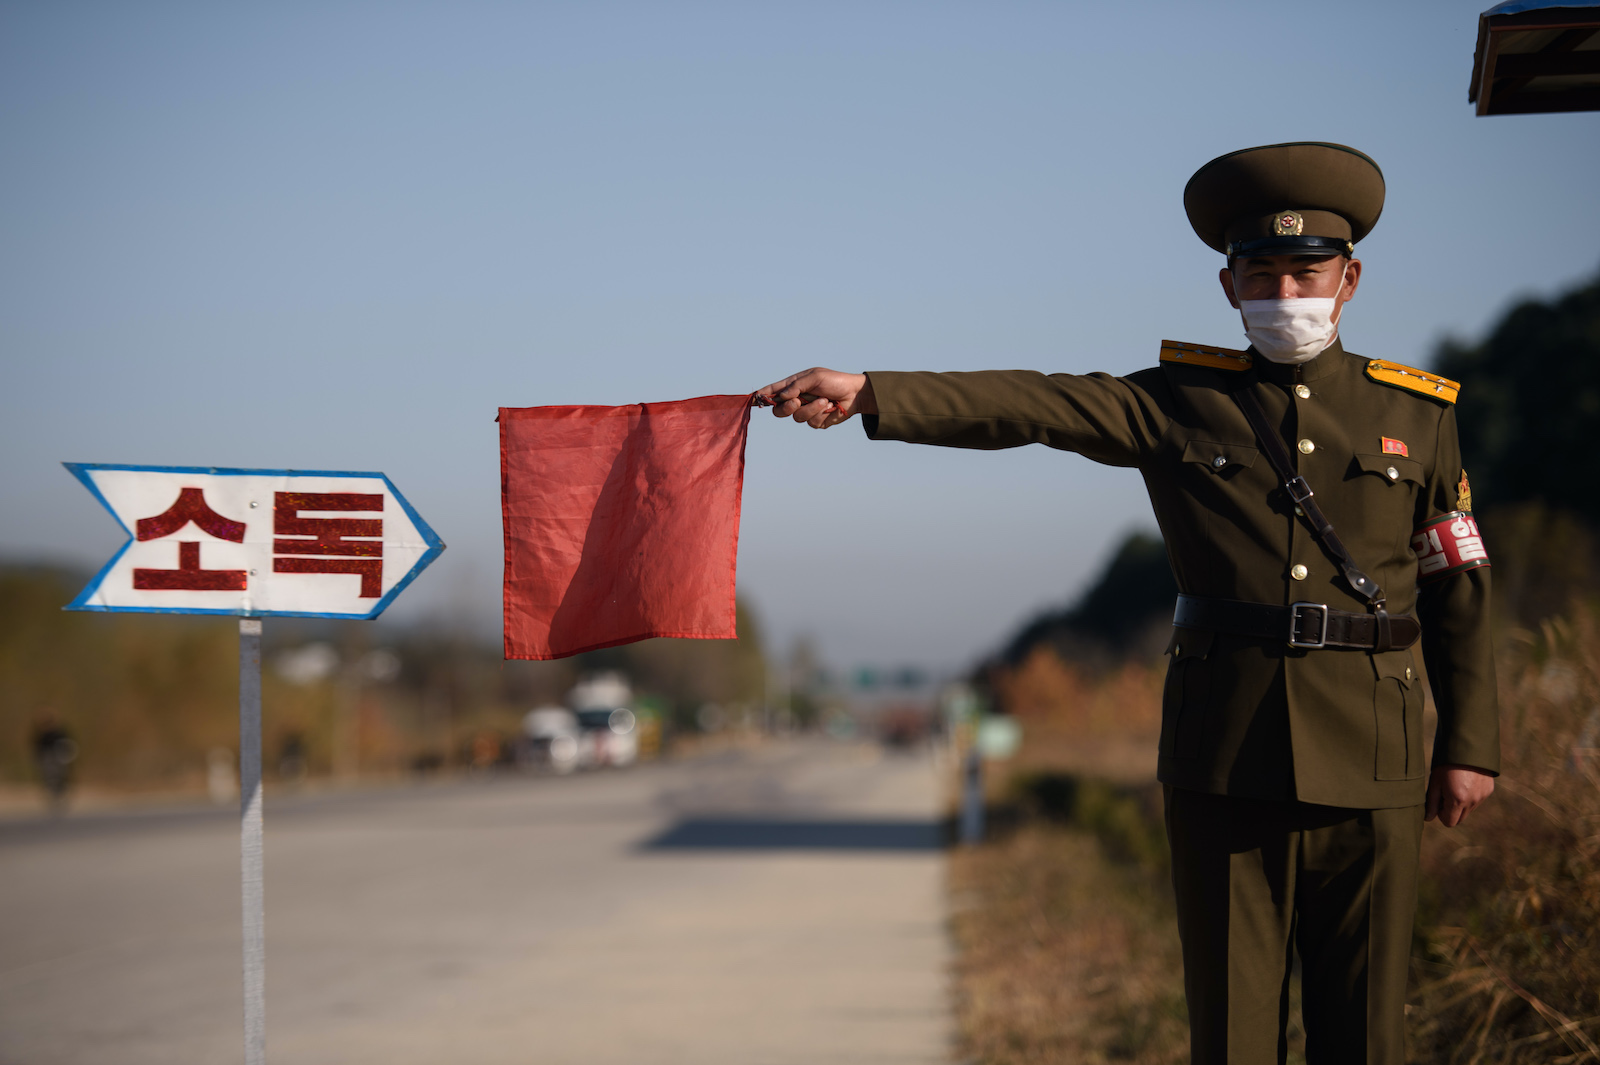 A security officer stopping a taxi for disinfection on the road to Wonsan, Kangwon province, North Korea, 29 October 2020, (Kim Won Jin/AFP via Getty Images)